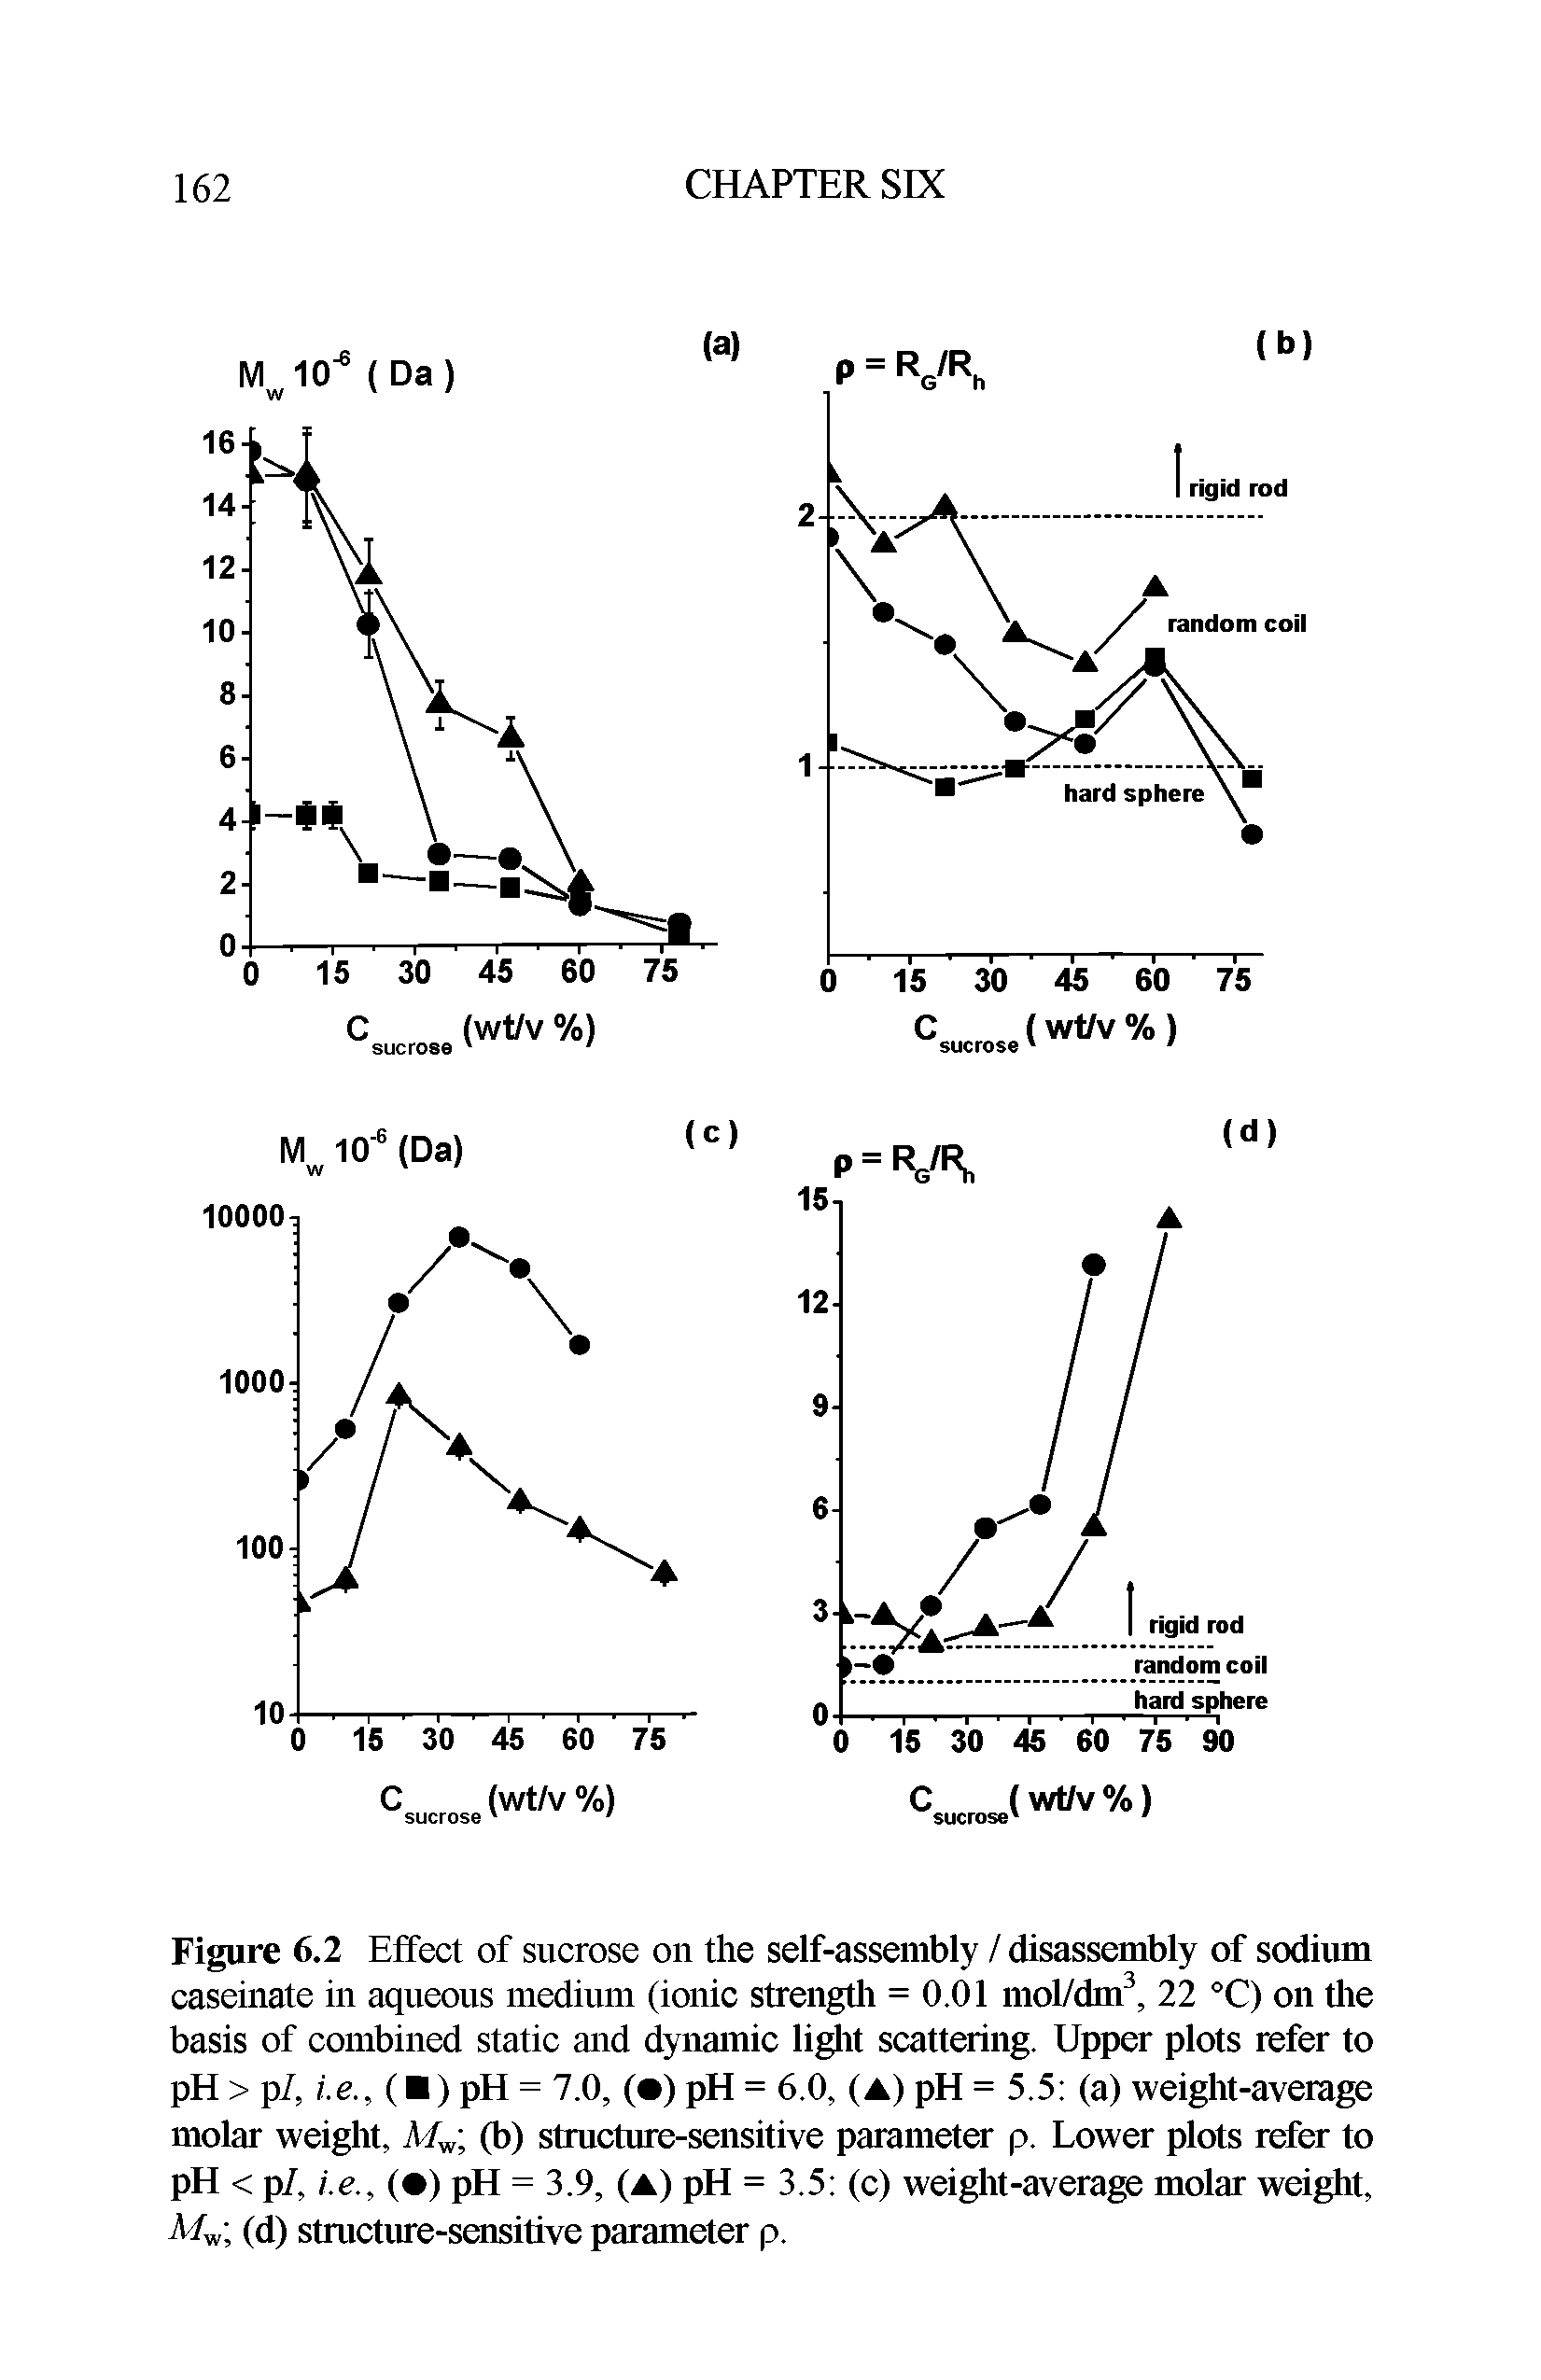 Figure 6.2 Effect of sucrose on the self-assembly / disassembly of sodium caseinate in aqueous medium (ionic strength = 0.01 mol/diu3, 22 °C) on the basis of combined static and dynamic light scattering. Upper plots refer to pH > pI, i.e.. ( ) pH = 7.0, ( ) pH = 6.0, (A) pH = 5.5 (a) weight-average molar weight, A/w (b) structure-sensitive parameter p. Lower plots refer to pH < p/, i.e., ( ) pH = 3.9, (A) pH = 3.5 (c) weight-average molar weight, A/w (d) structure-sensitive parameter p.